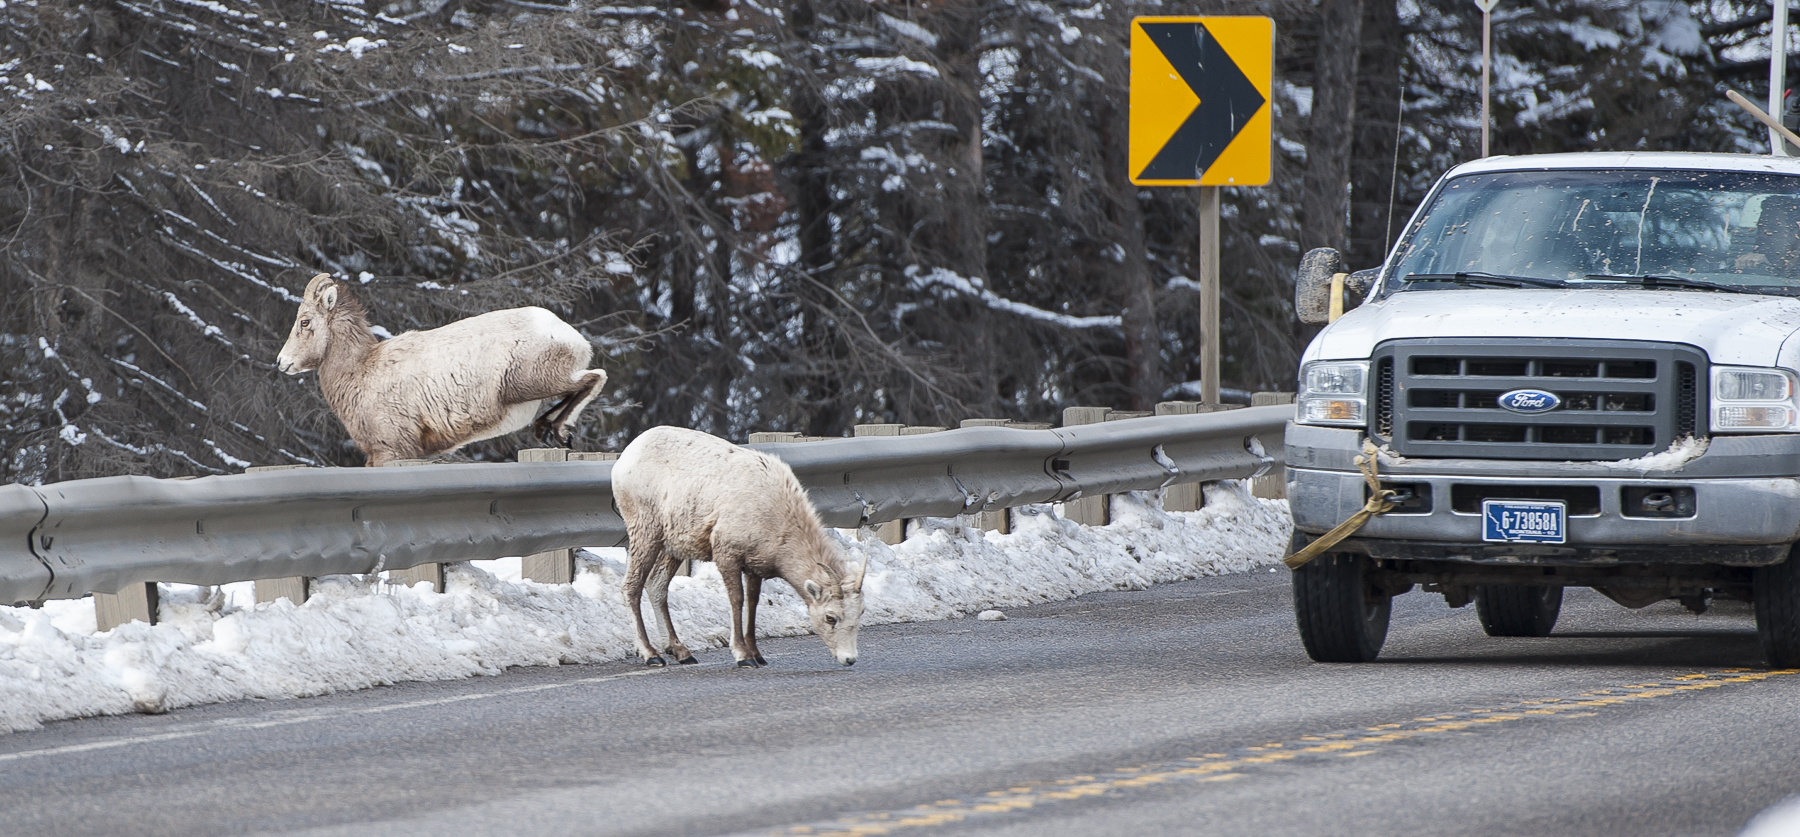 Vehicle approaches two Big Horn sheep on Hwy 191. One is licking salt from the road surface, the other is jumping over a guardrail away from the road. There is a road curve warning sign in the backgorund.